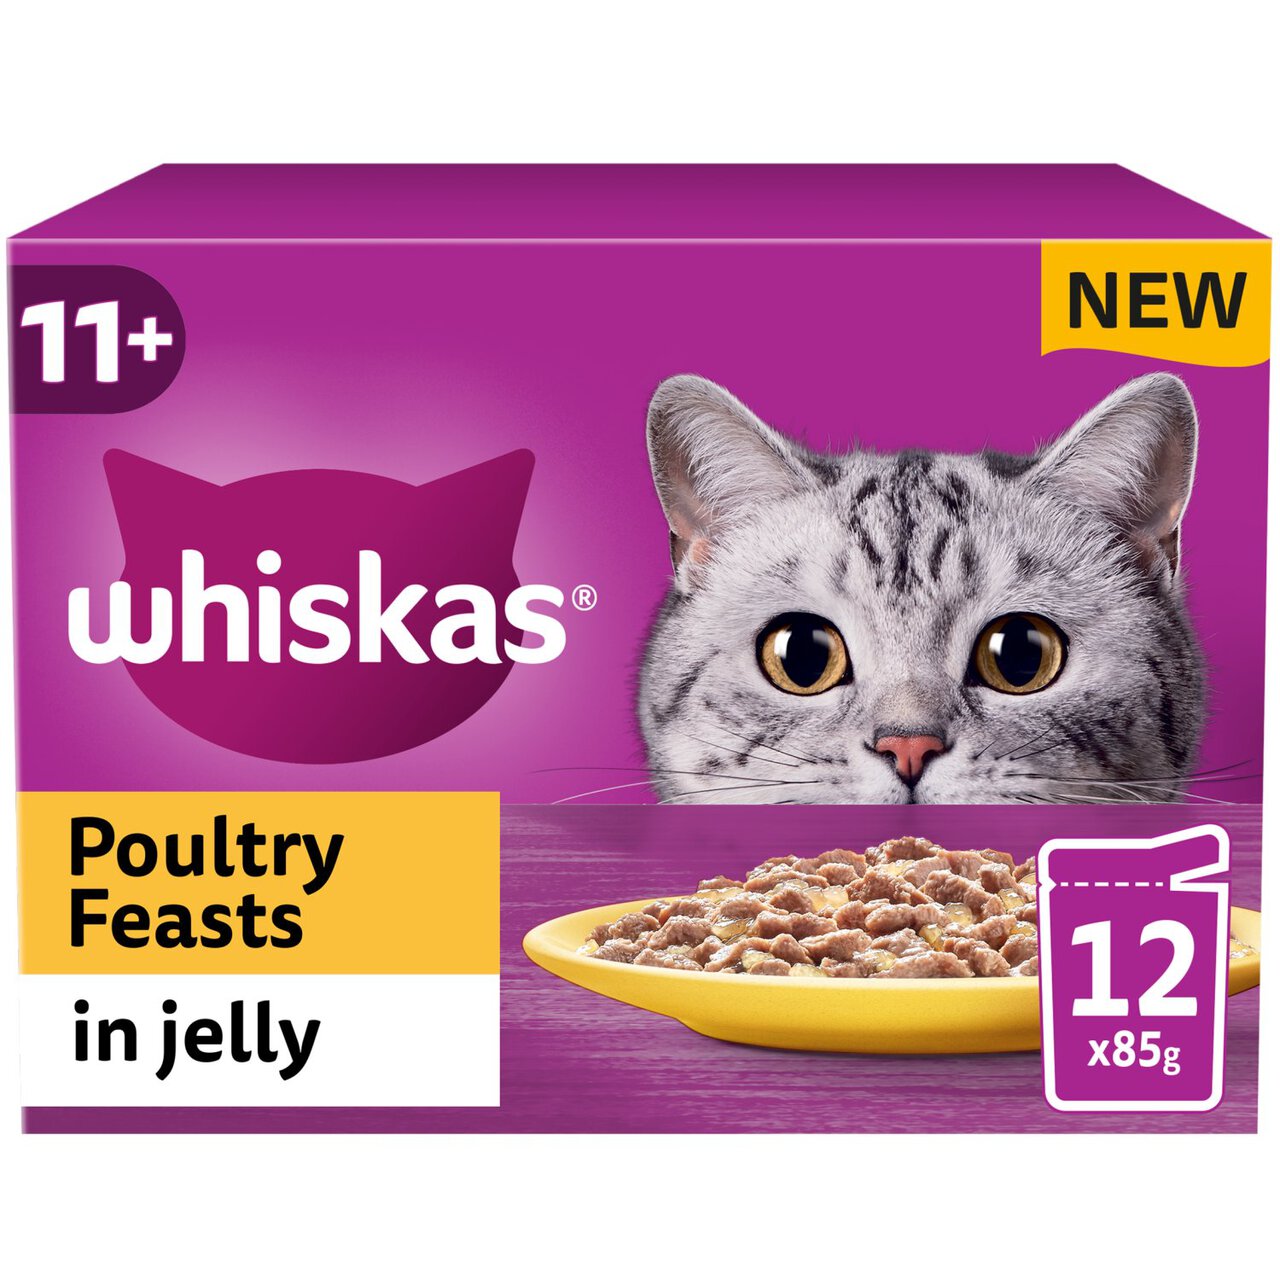 WHISKAS 11+ Cat Pouches Poultry Feasts in Jelly 12 x 85g